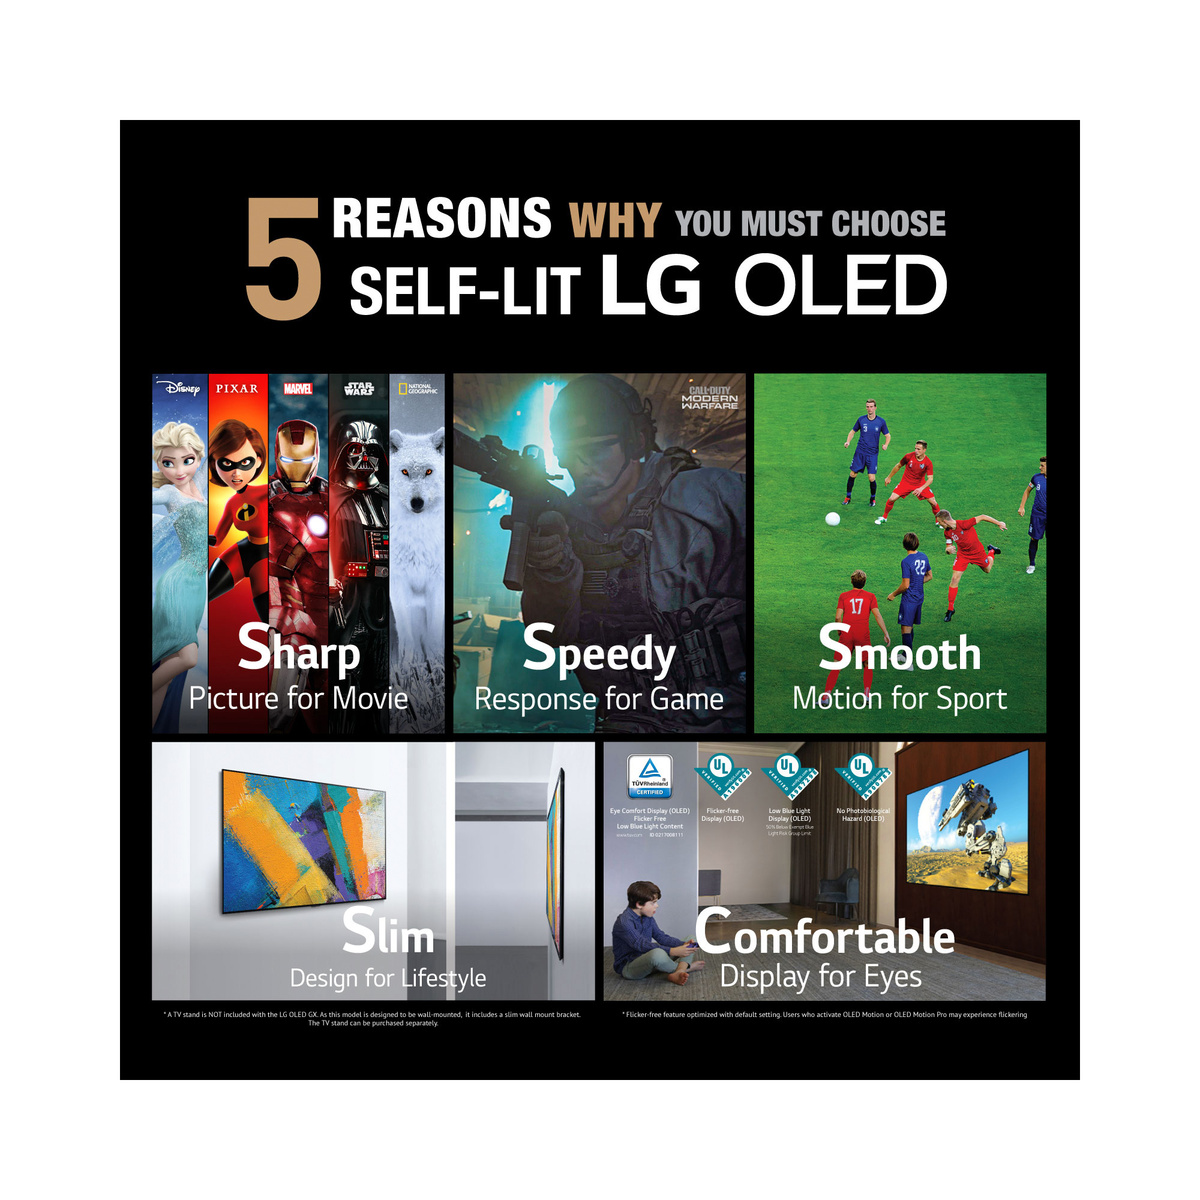 LG OLED 4K Smart TV 65 Inch G1 Series Gallery Design 4K Cinema HDR webOS Smart with ThinQ AI Pixel Dimming